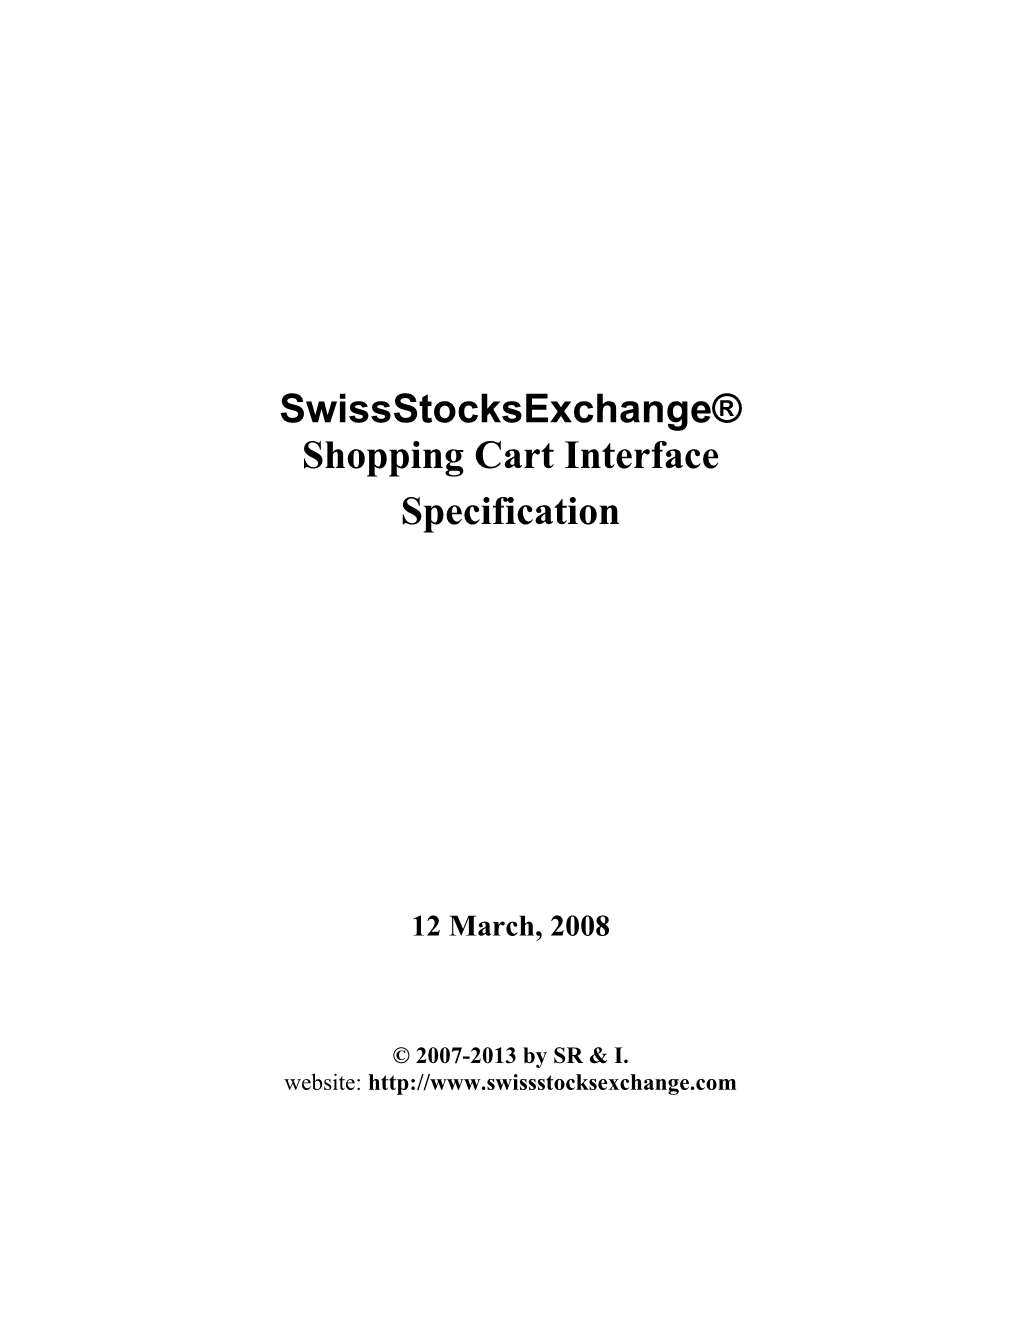 1.3Overview of Swissstocksexchange Shopping Cart Interface